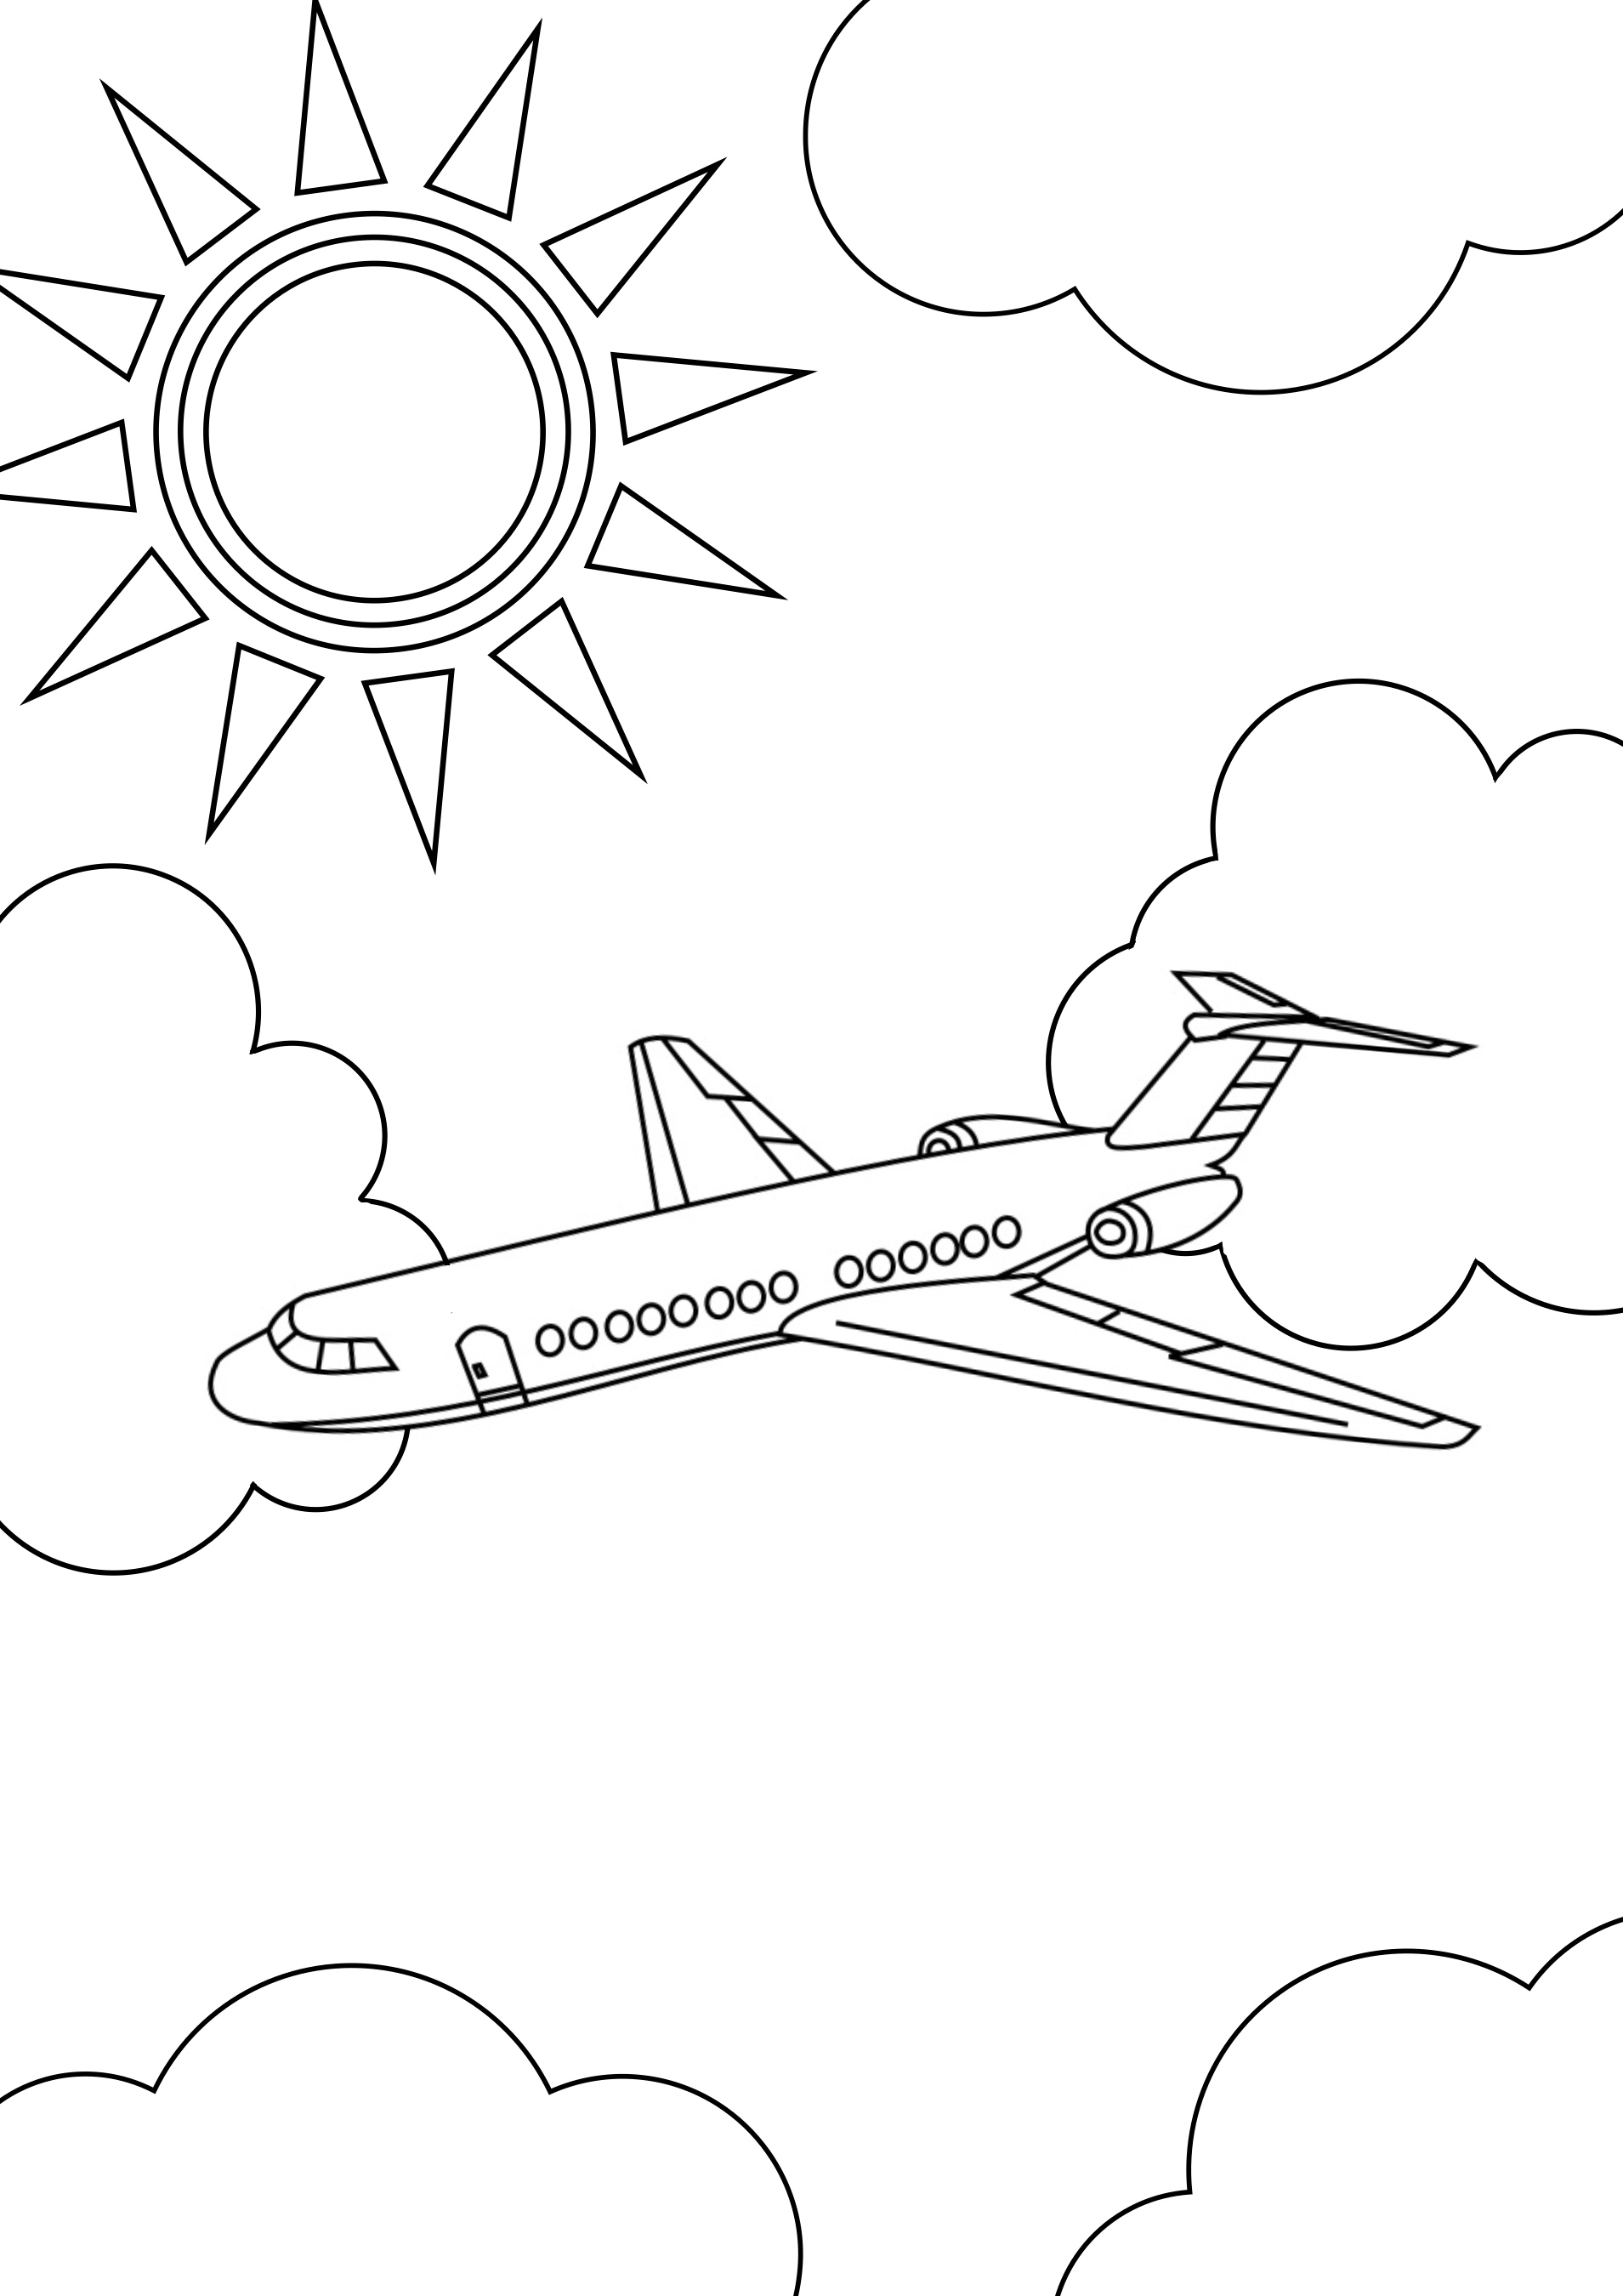 Jetliner cruising above the clouds coloring page